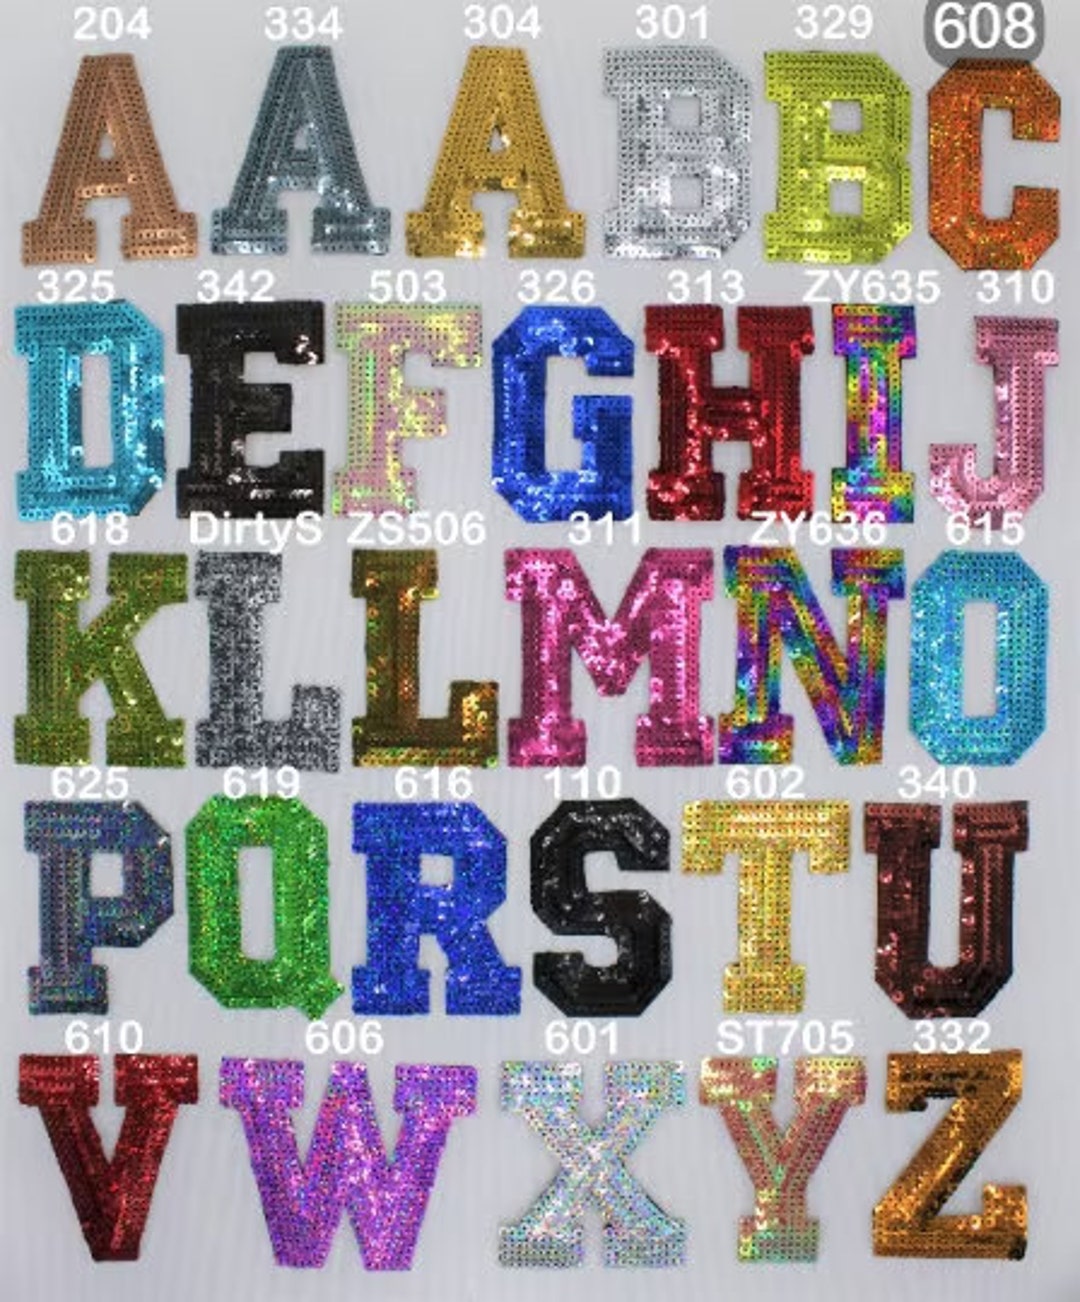 Rhinestone Iron on Letter Patches - 26 Pieces - A-Z Iron on Letters for Clothing with Sparkly Rainbow Colors - Strong Glue Backing for A Firm Hold 